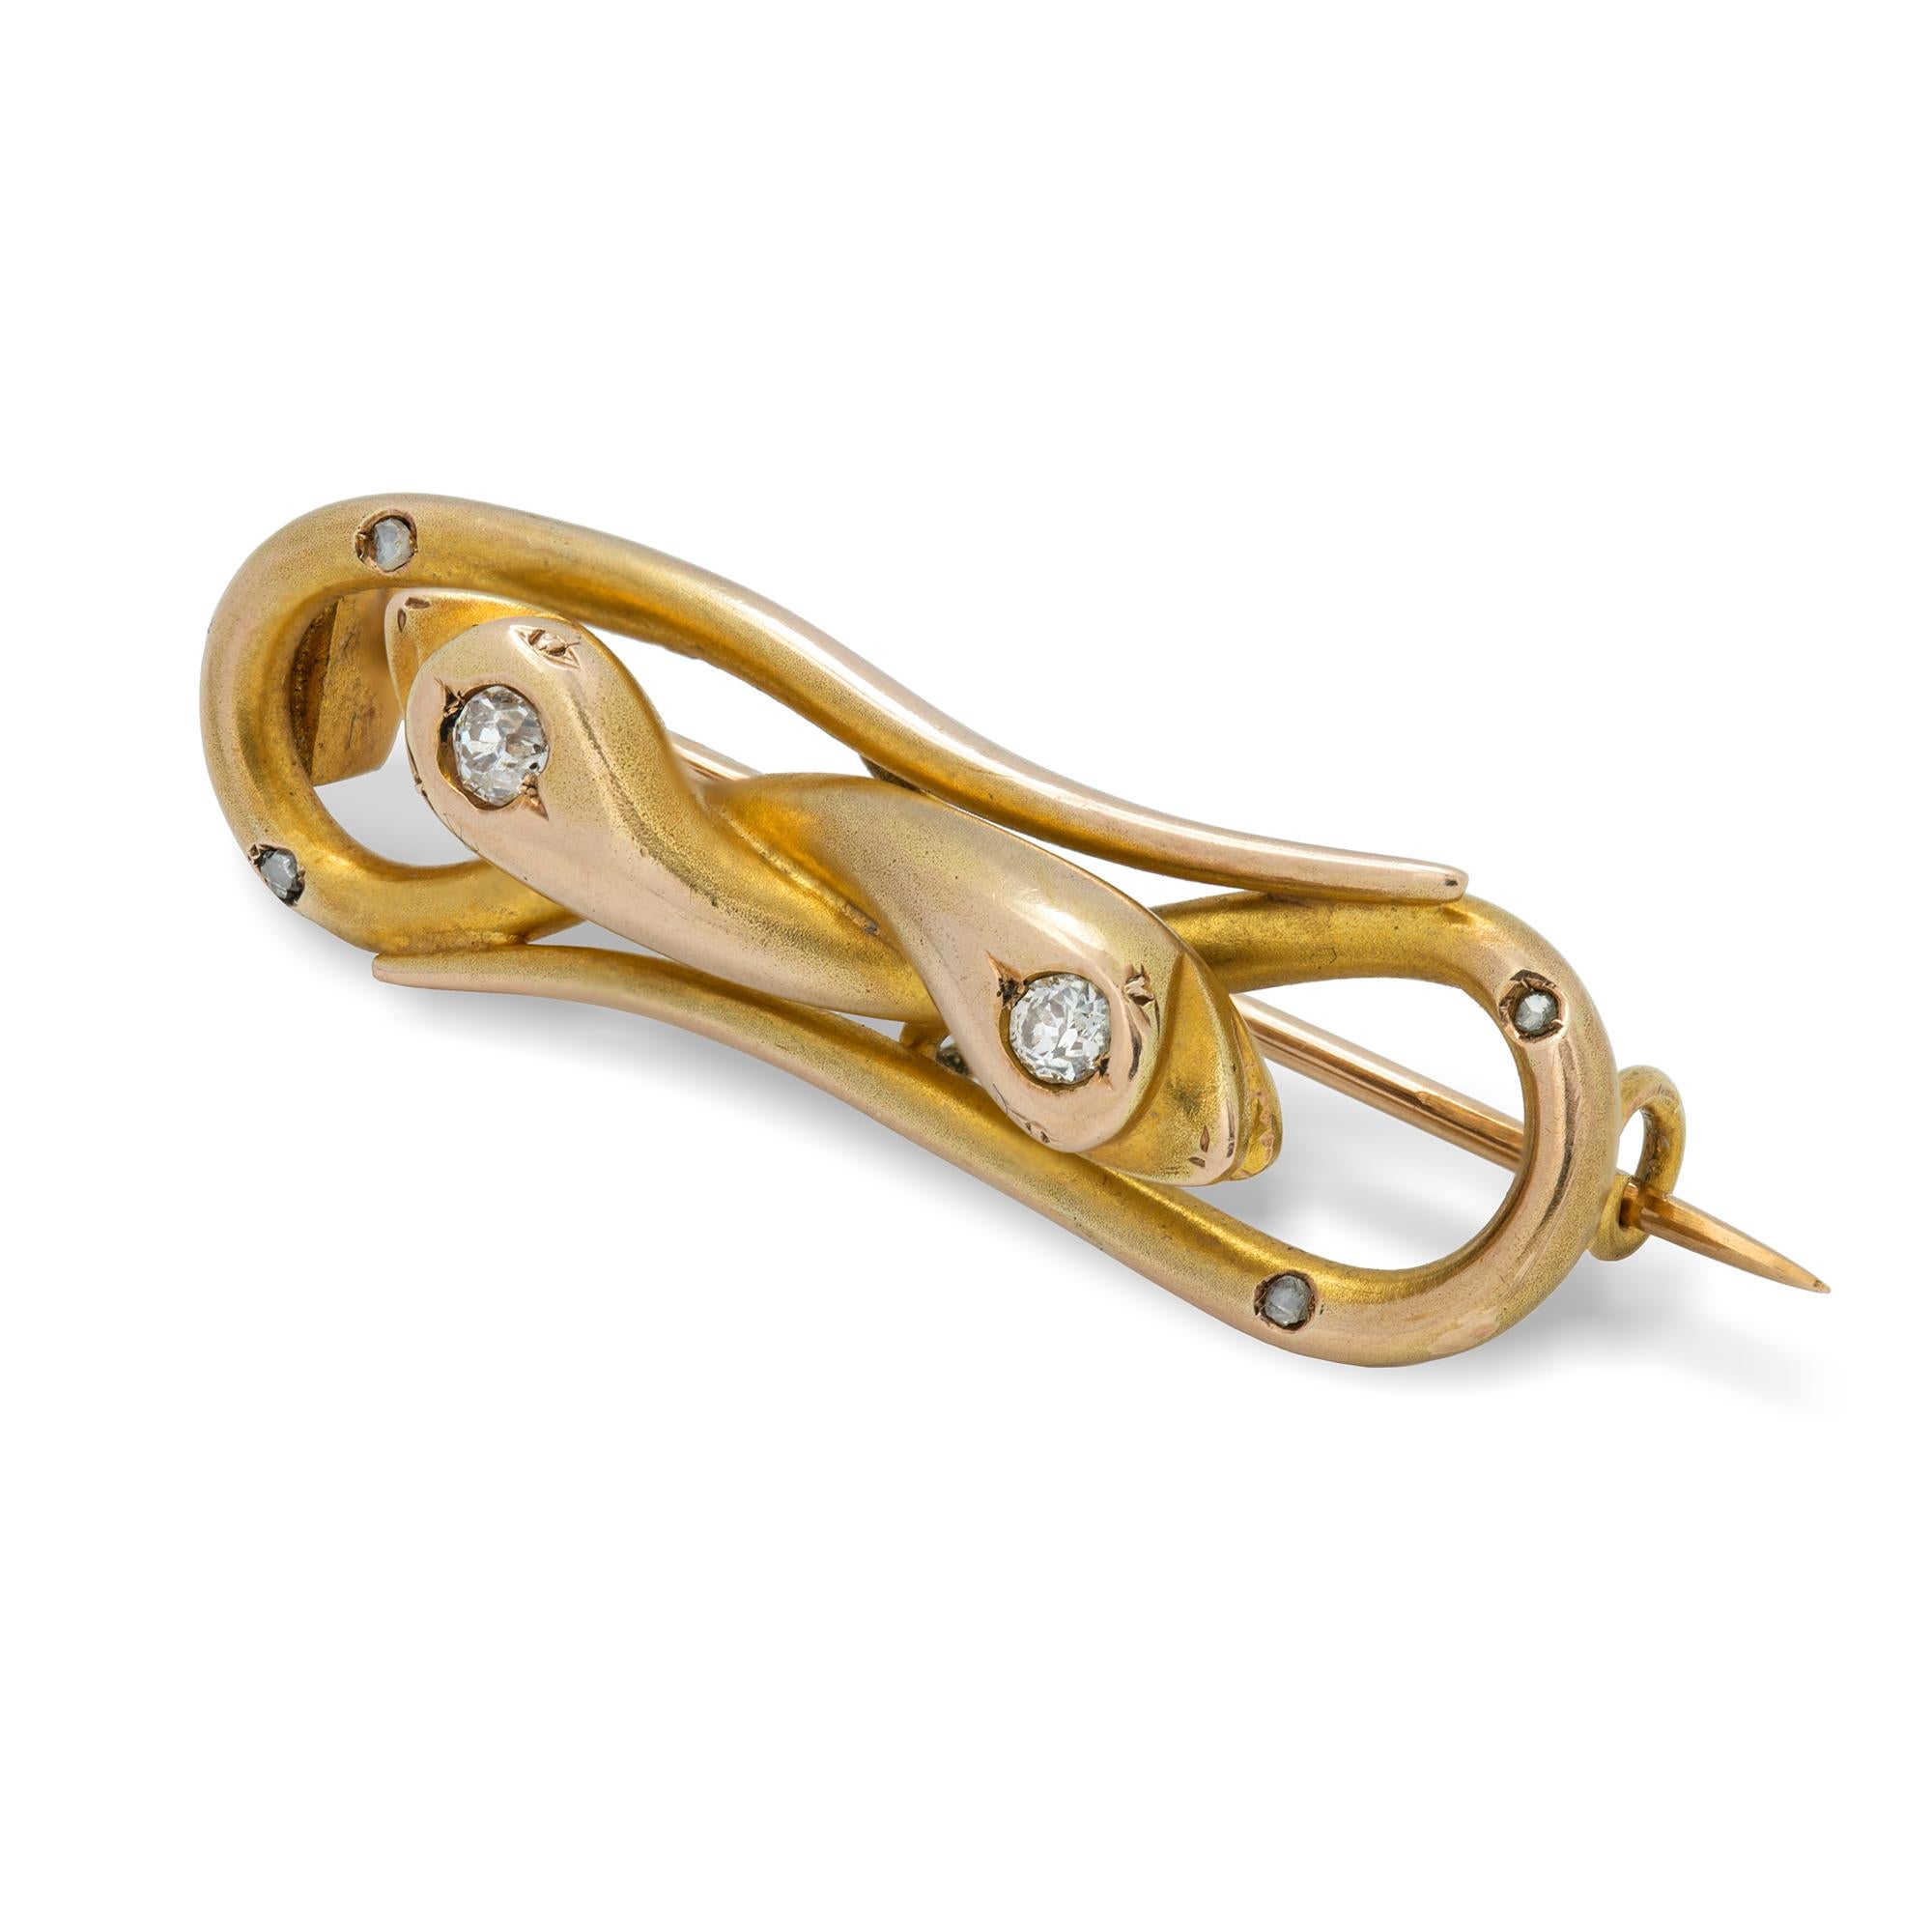 A Victorian double serpent yellow gold brooch, the two serpents curled in a figure-of-eight design, each head set with an old-cut diamond, all in yellow gold with satin finish and gold brooch fitting, circa 1860, bearing later French hallmark for